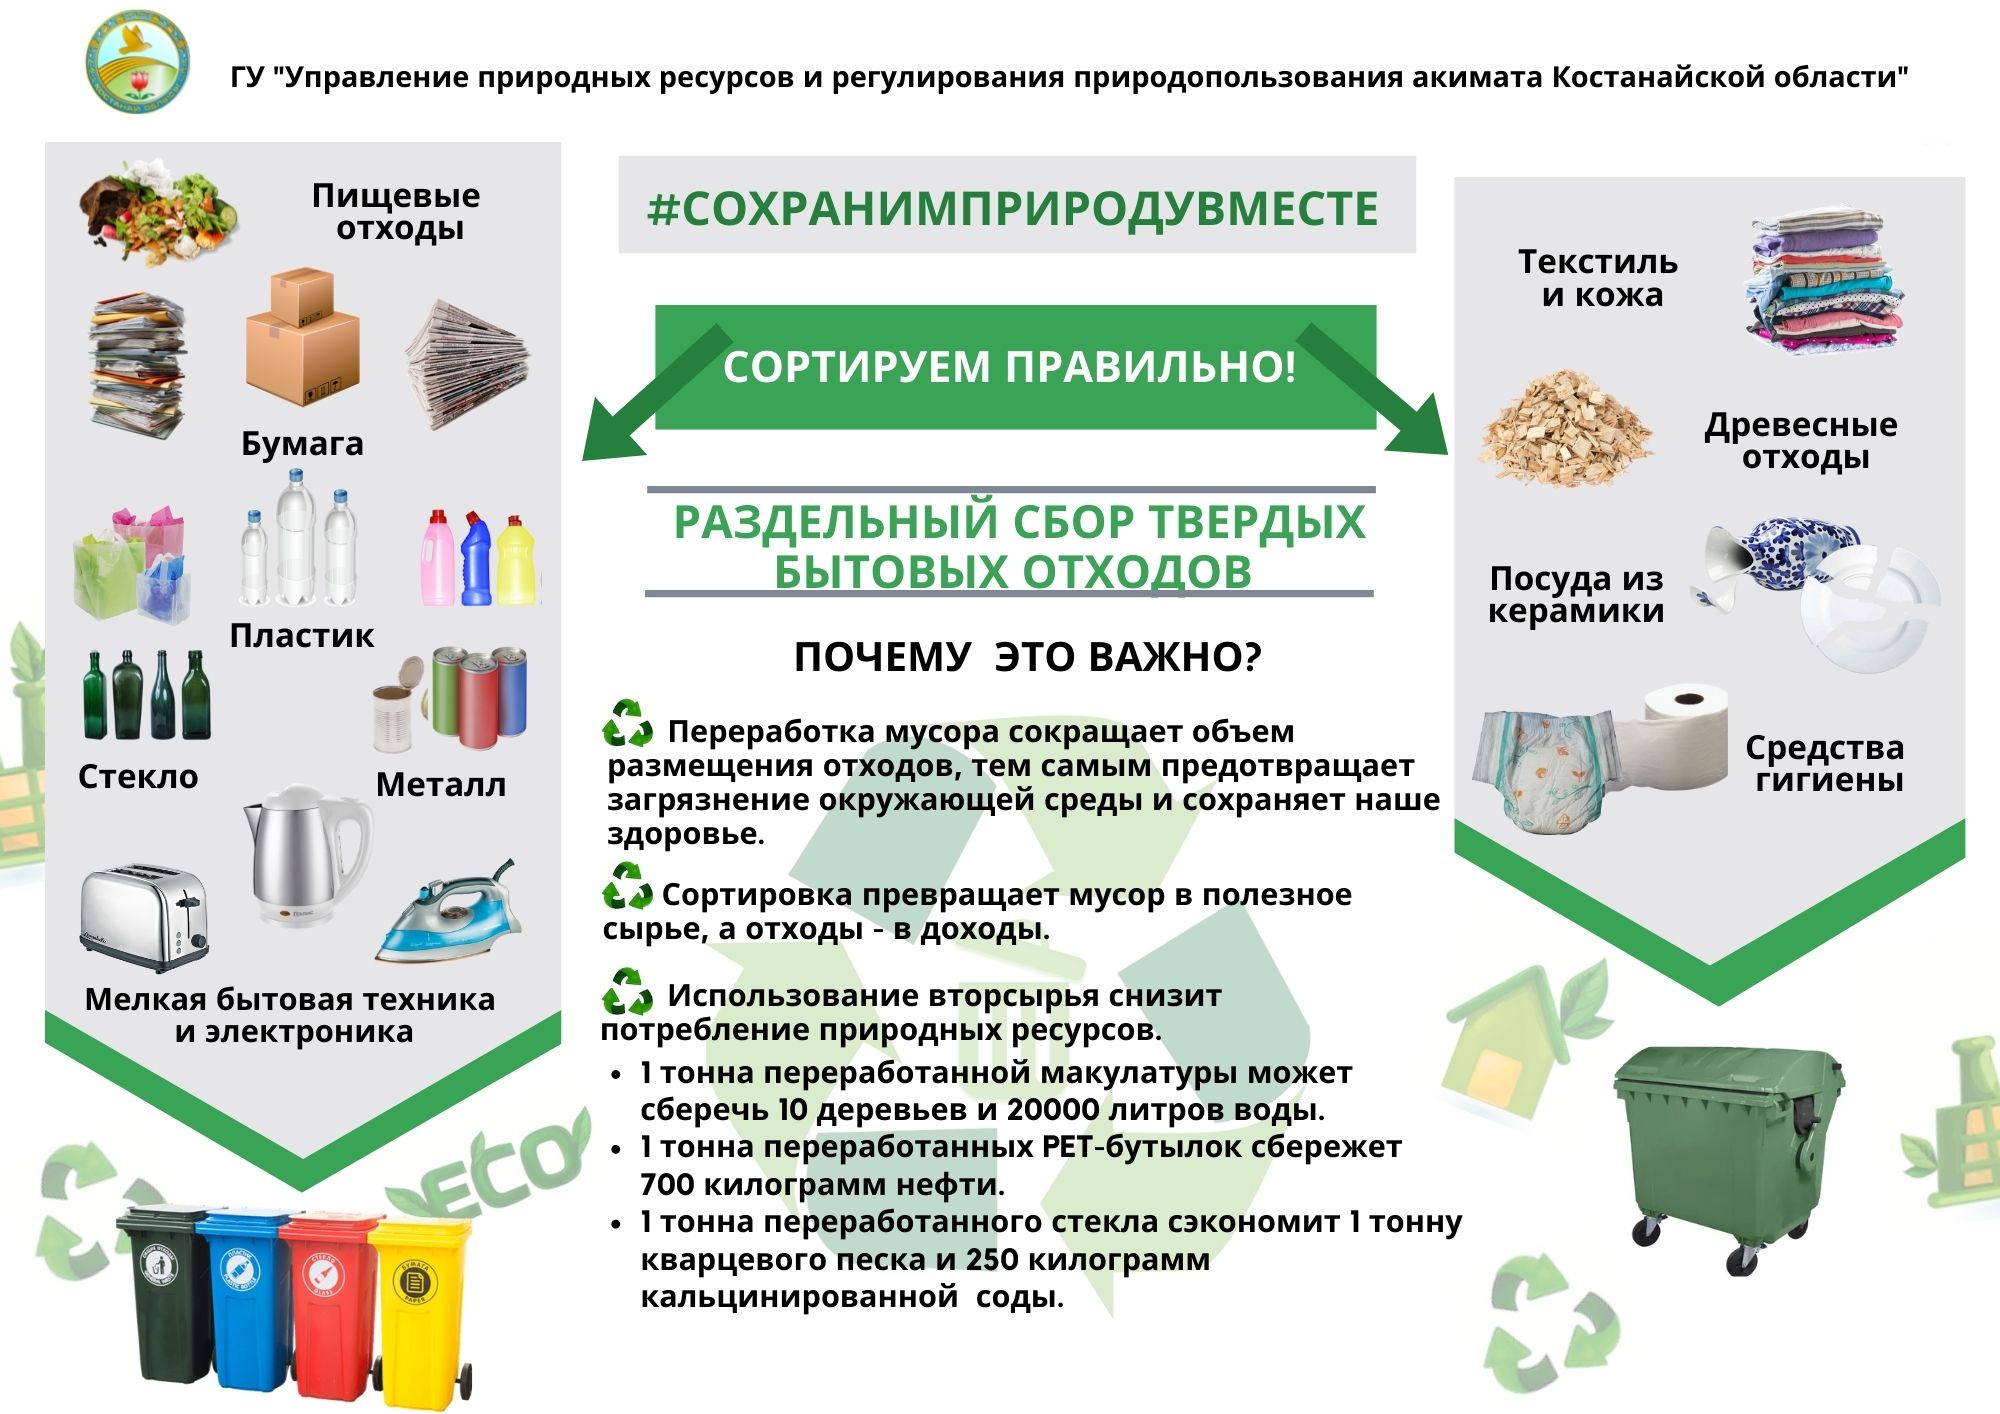 "Promotion of separate collection of municipal solid waste".